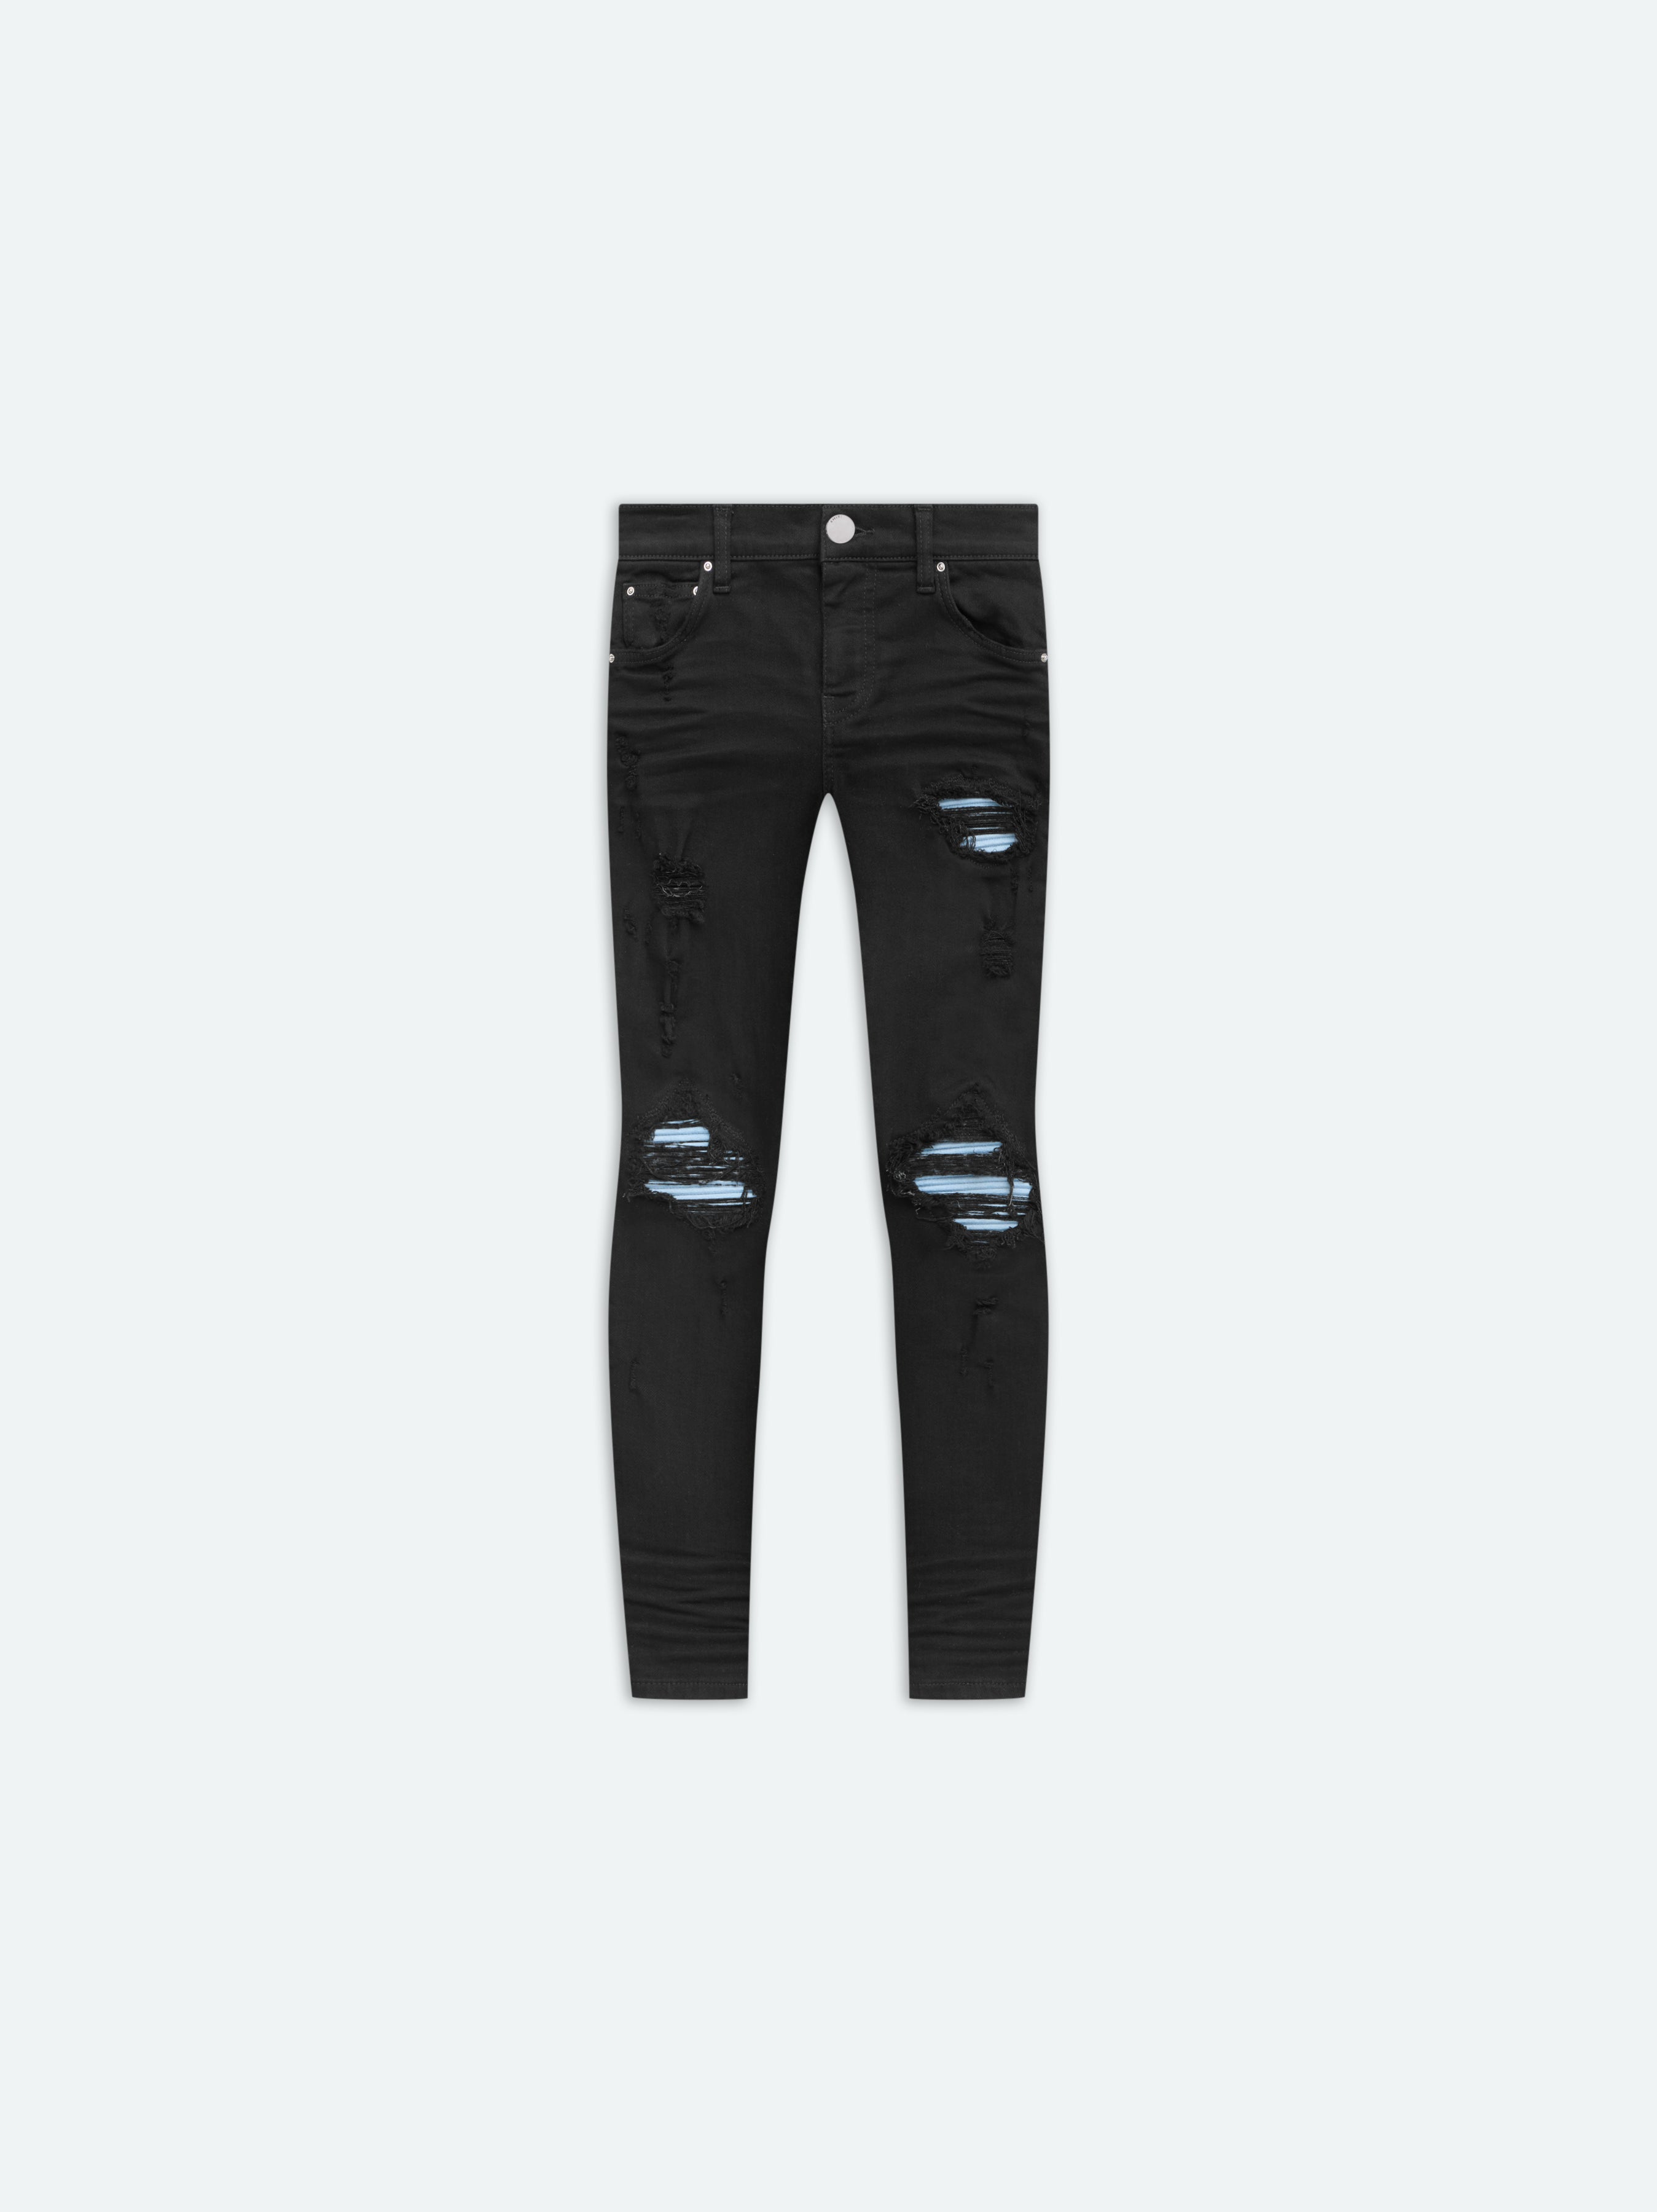 Product KIDS - MX1 JEAN - Black featured image